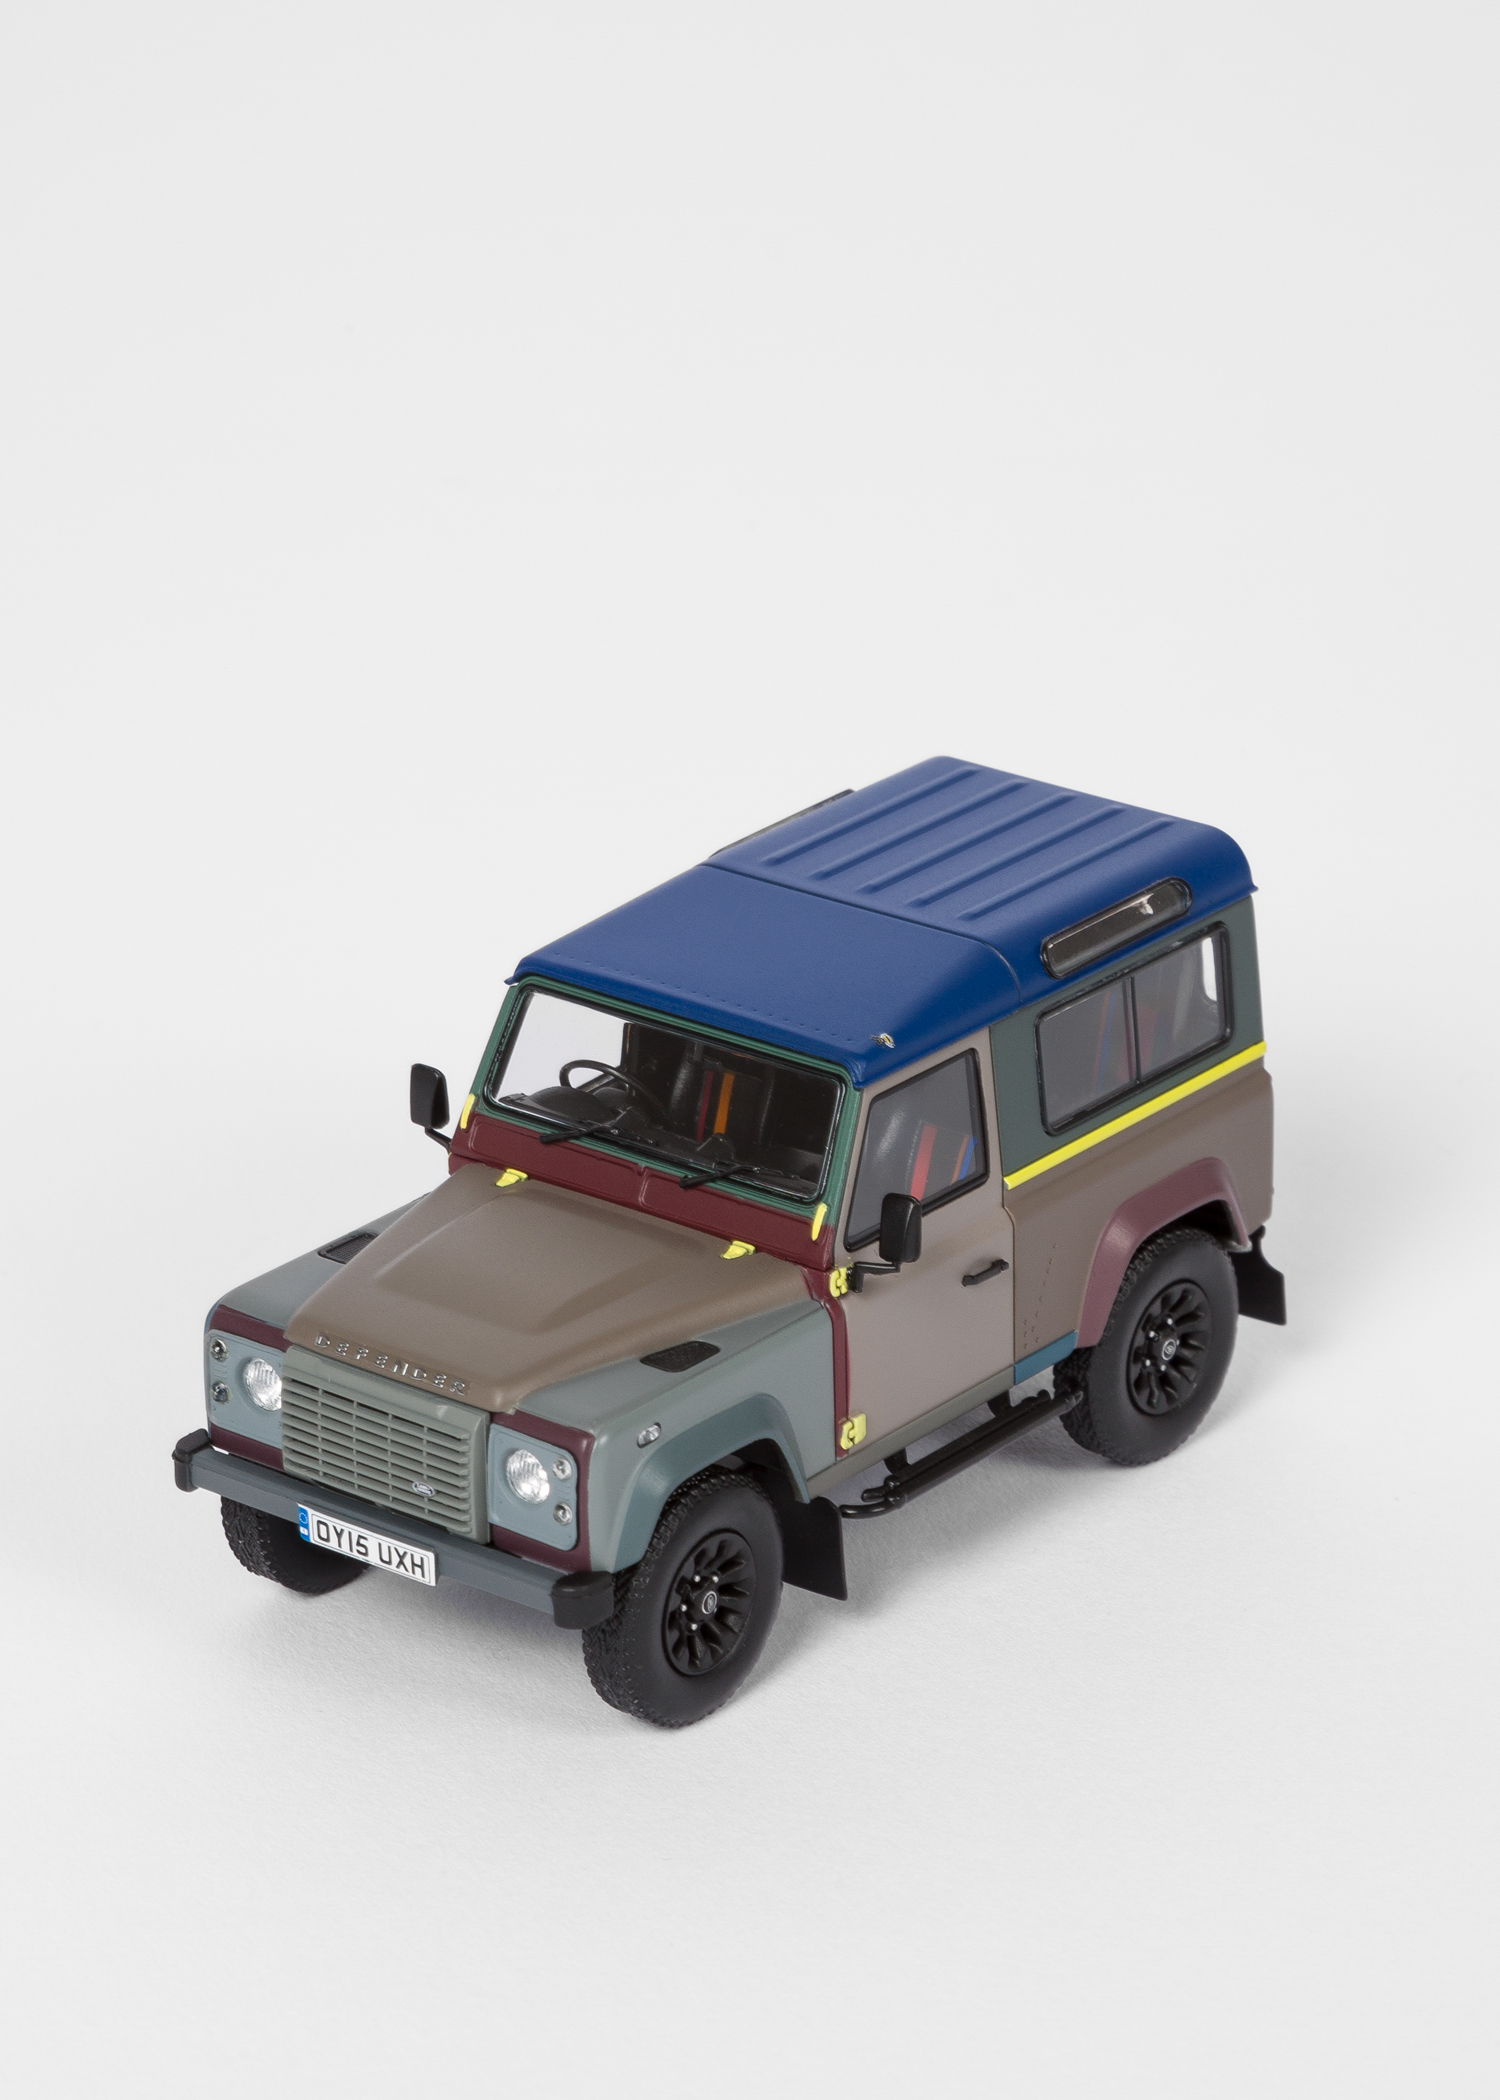 angled car view - Paul Smith + Land Rover - Defender 90 1:43 Die Cast Metal Collector's Edition 